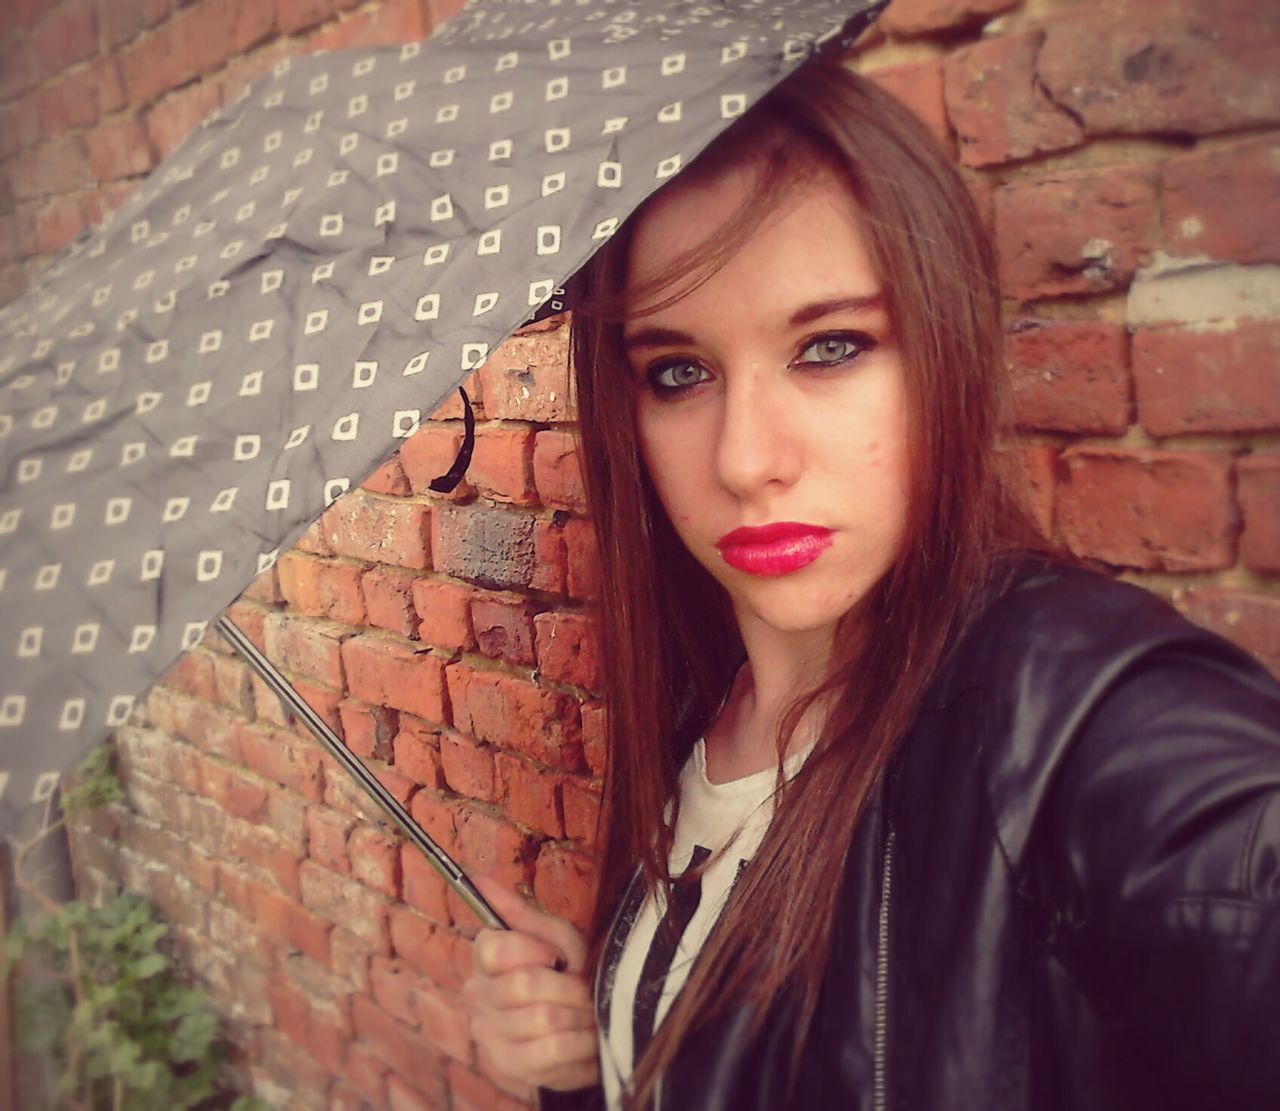 young adult, young women, long hair, portrait, person, lifestyles, looking at camera, front view, wall - building feature, brick wall, leisure activity, casual clothing, black hair, headshot, standing, built structure, smiling